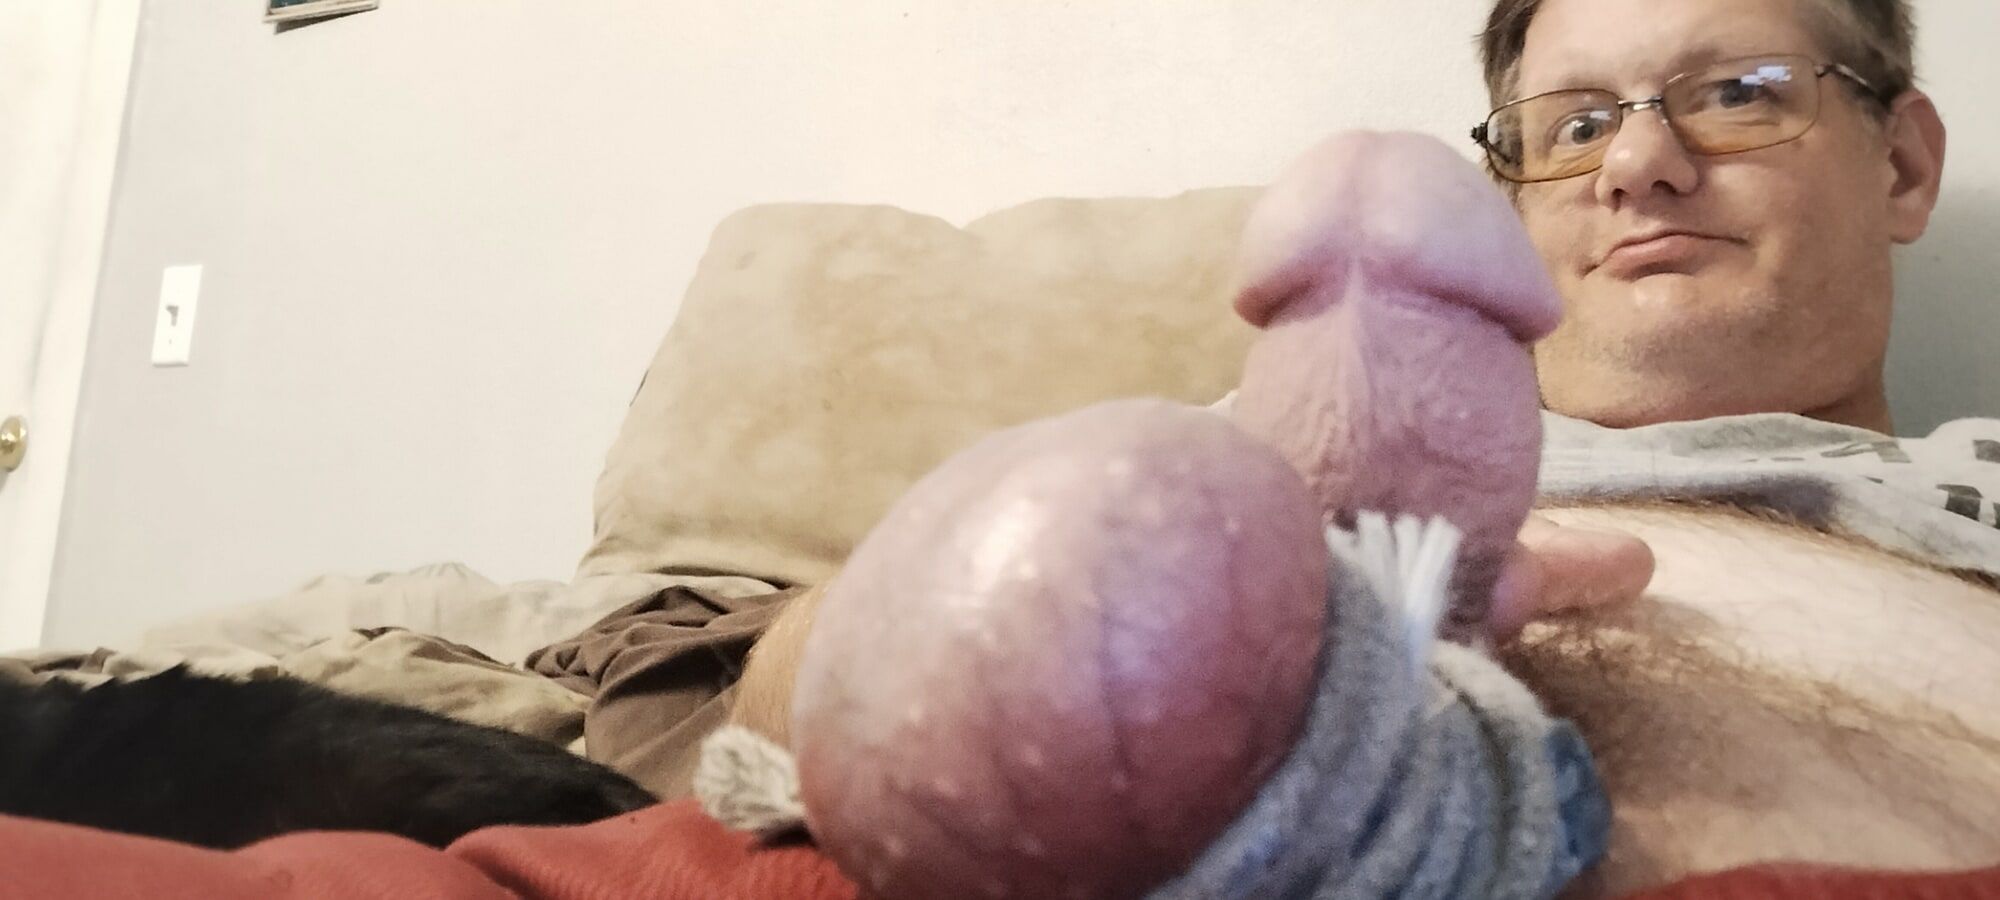 My spun self and I want any and all cocks! #39